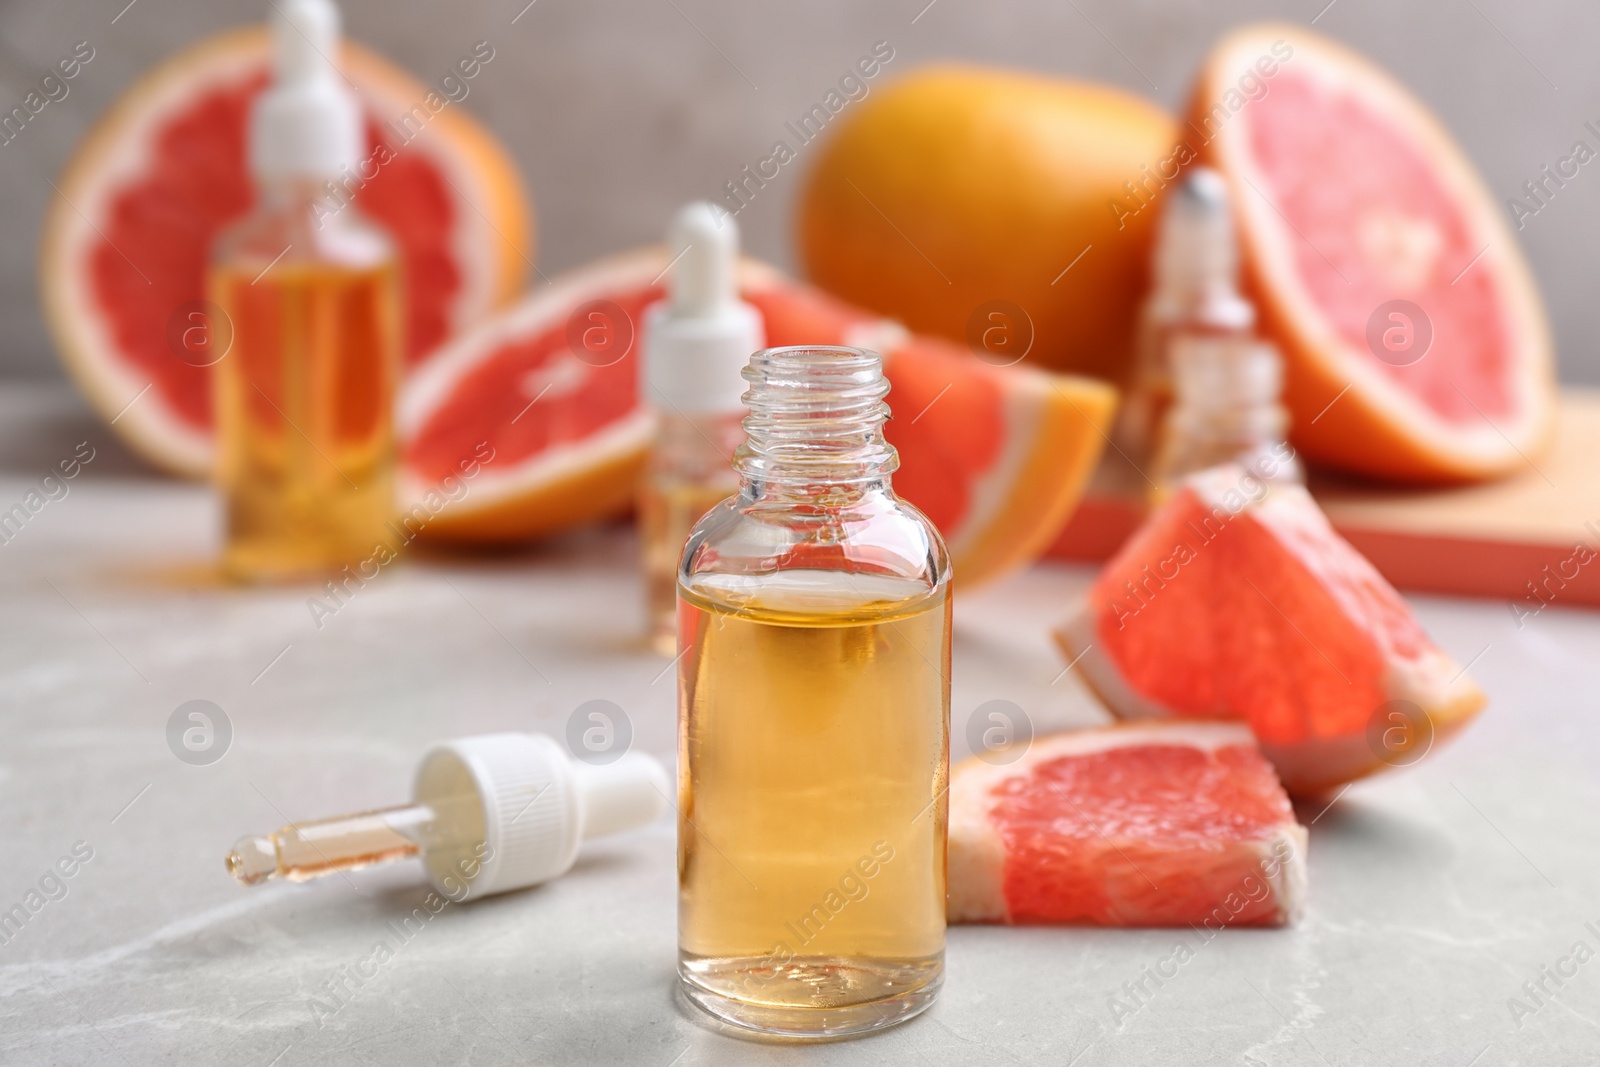 Photo of Bottles of essential oil and fresh grapefruits on grey table